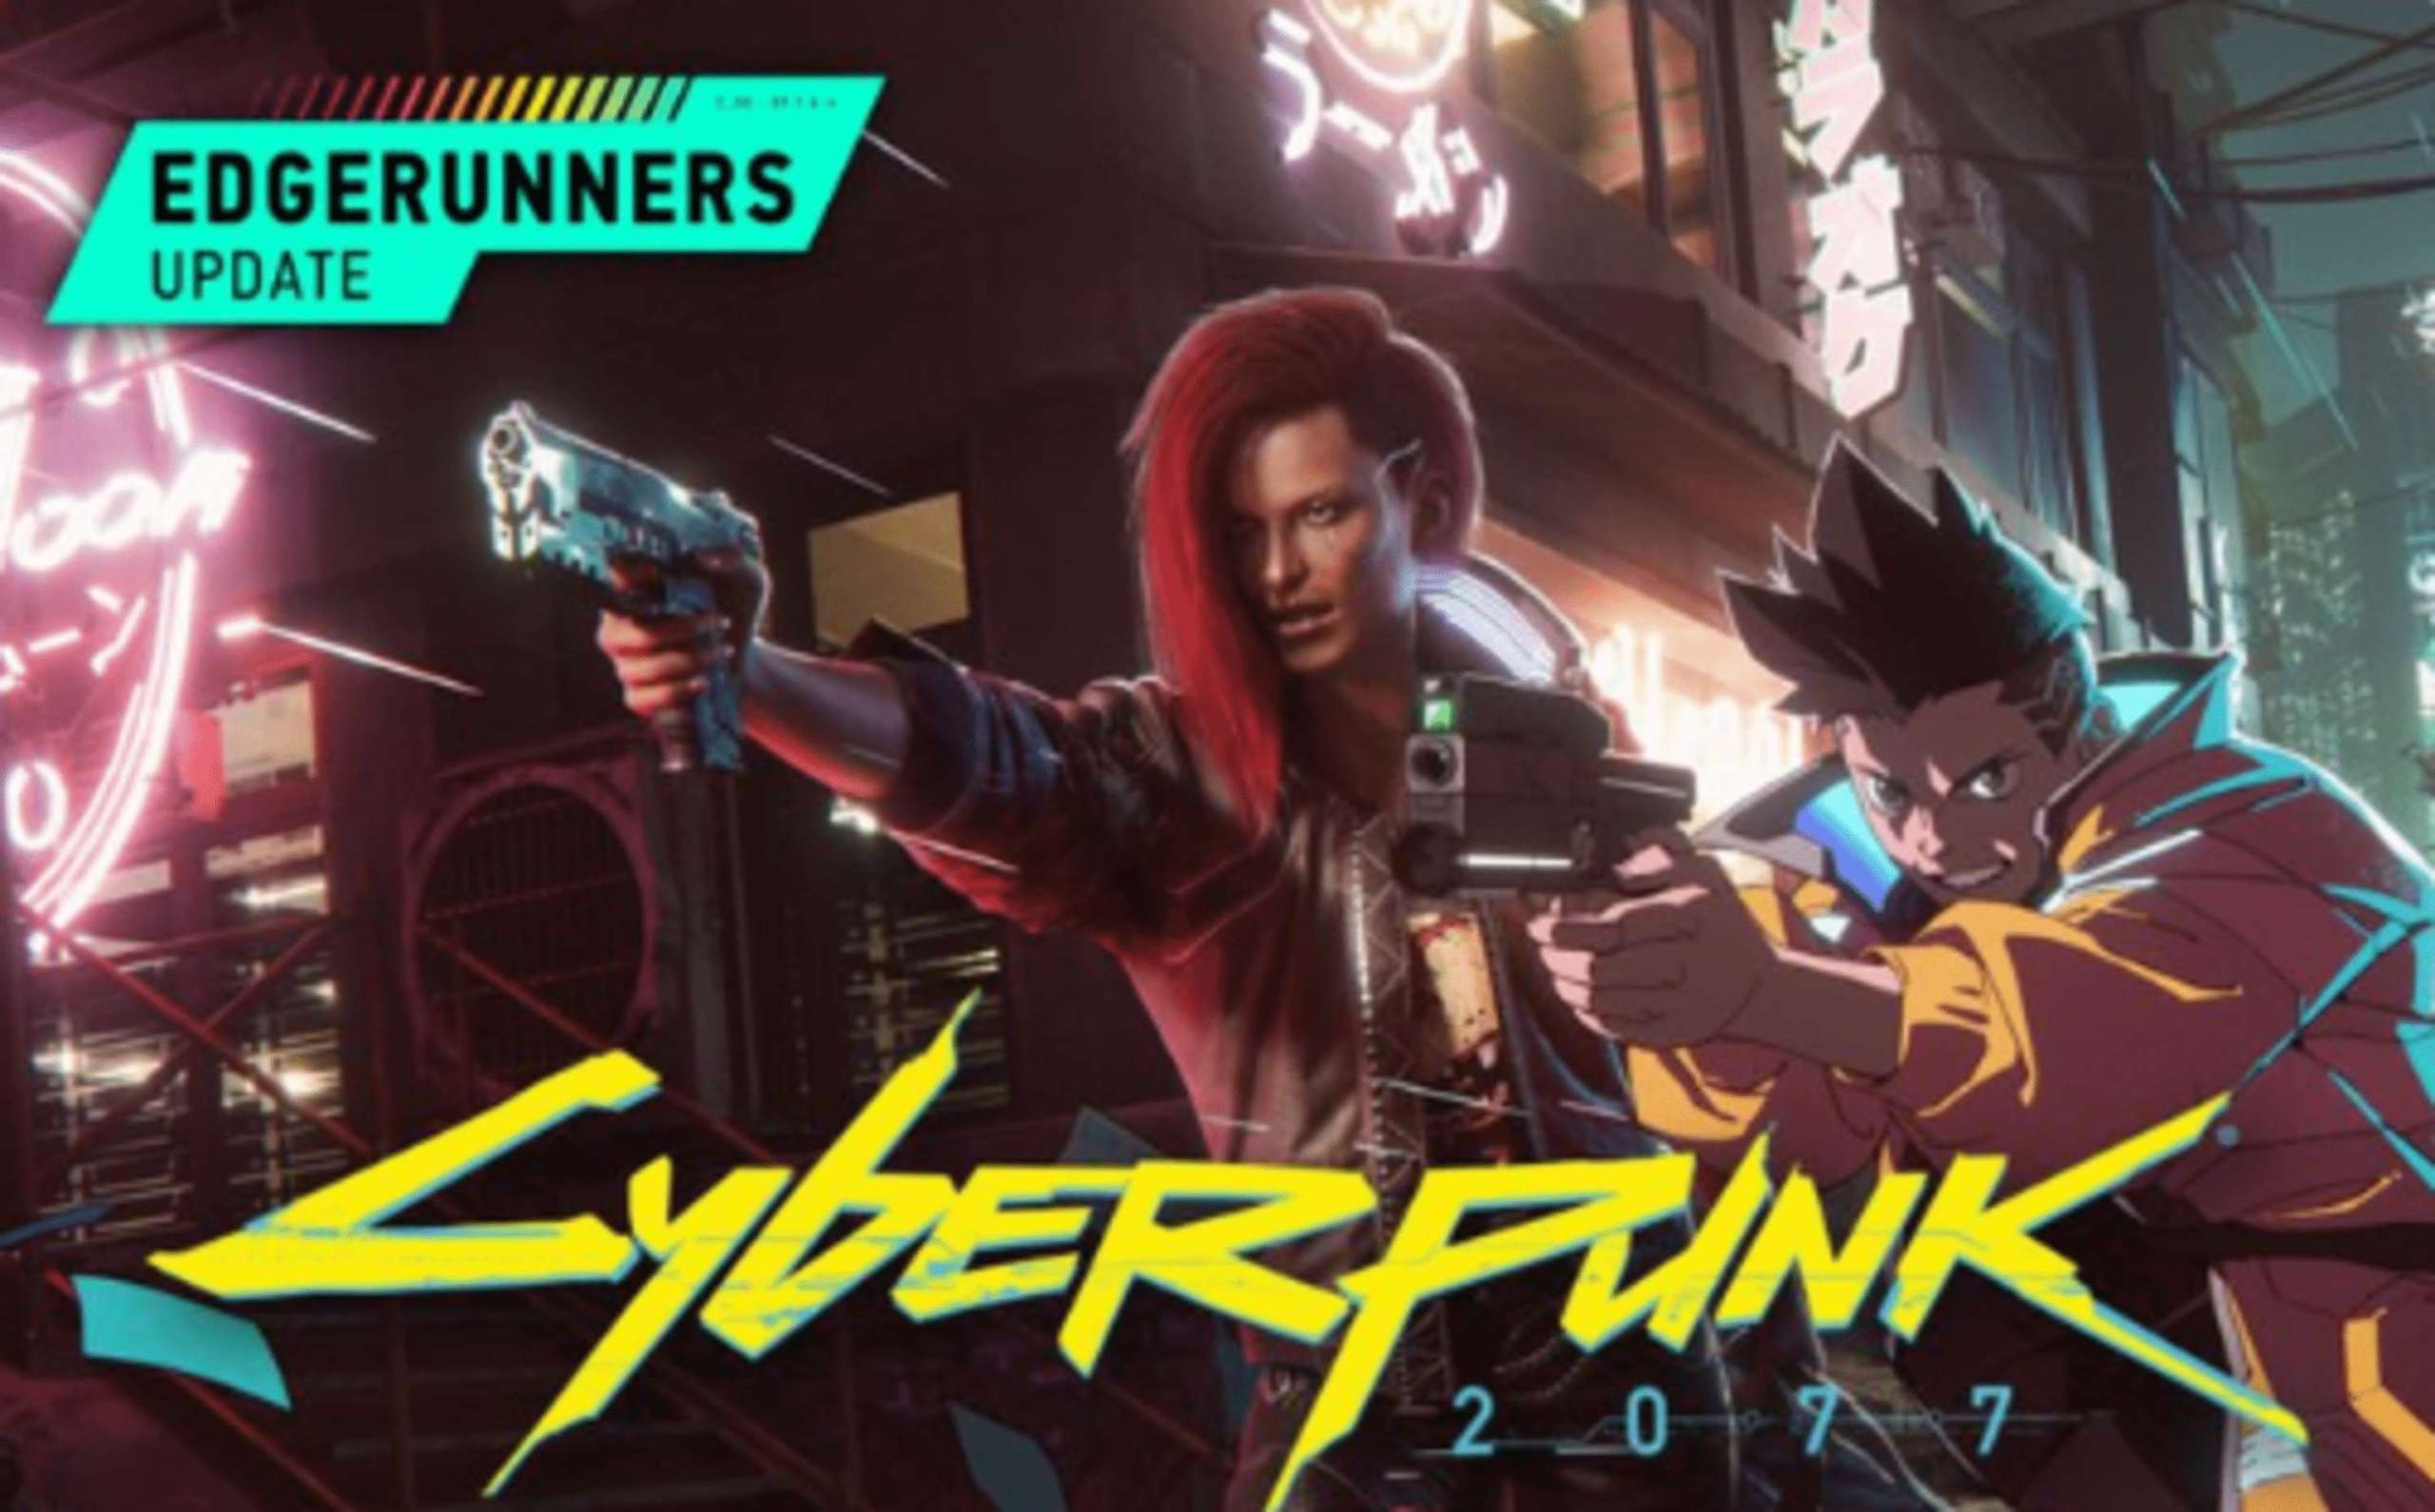 Daily Player Counts For Cyberpunk 2077 Have Exceeded 1 Million Over The Past Week